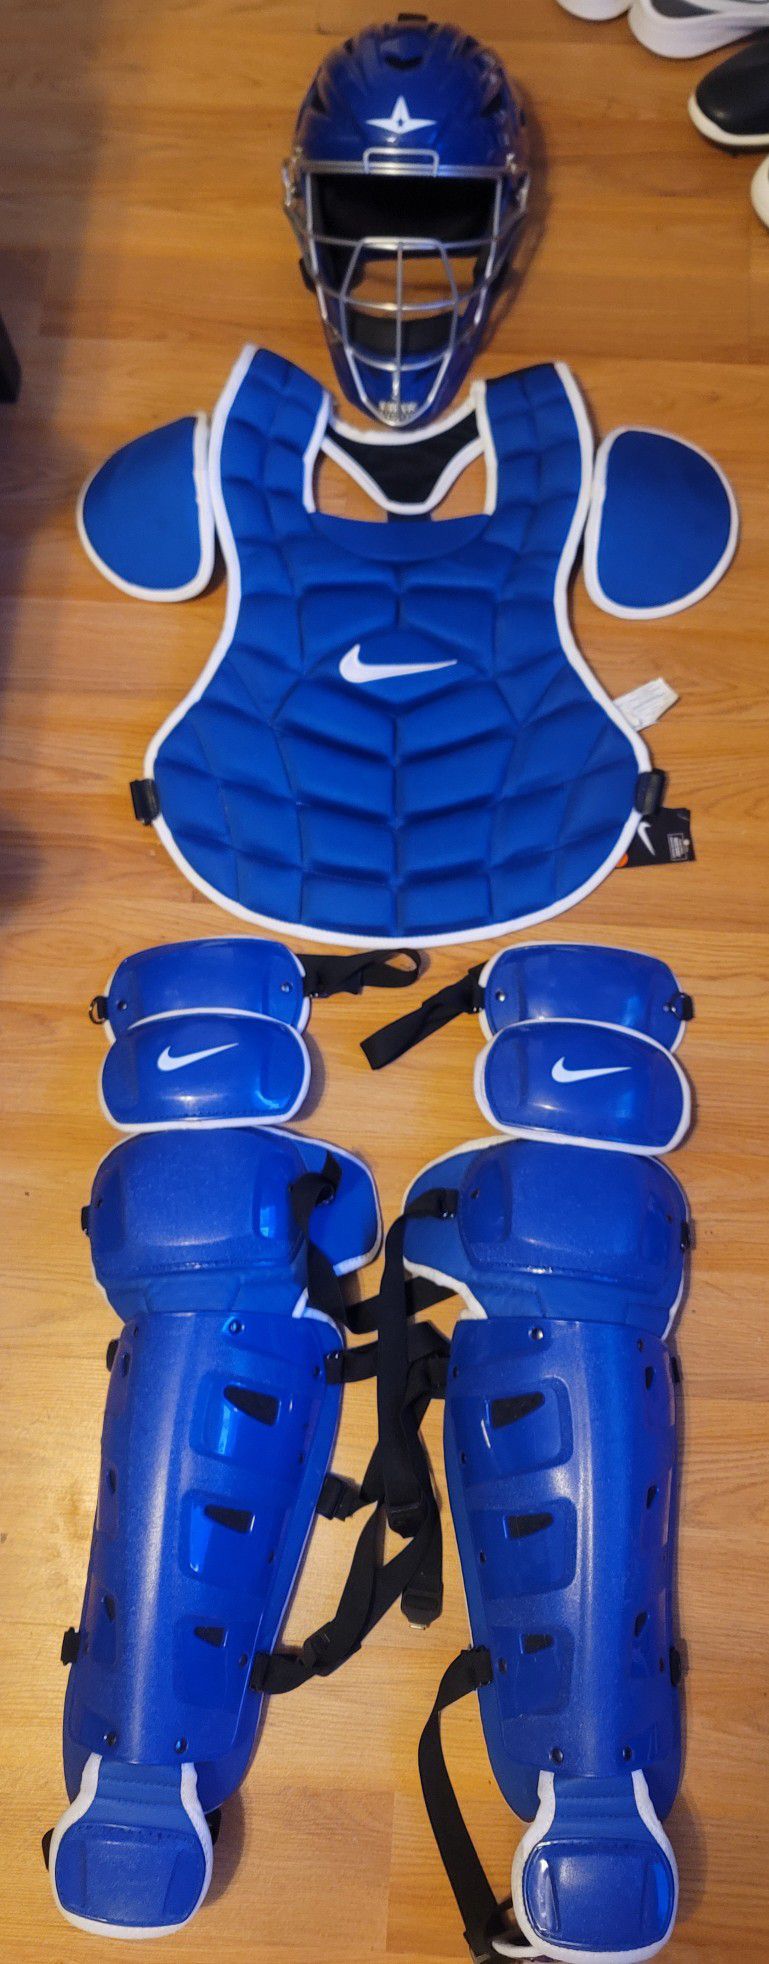 Brand New Nike Catchers Gear 15-16 Blue White Adult Size Shinguards Chest  Protector & All Star Hockey Style Mask Blue for Sale in West Covina, CA 